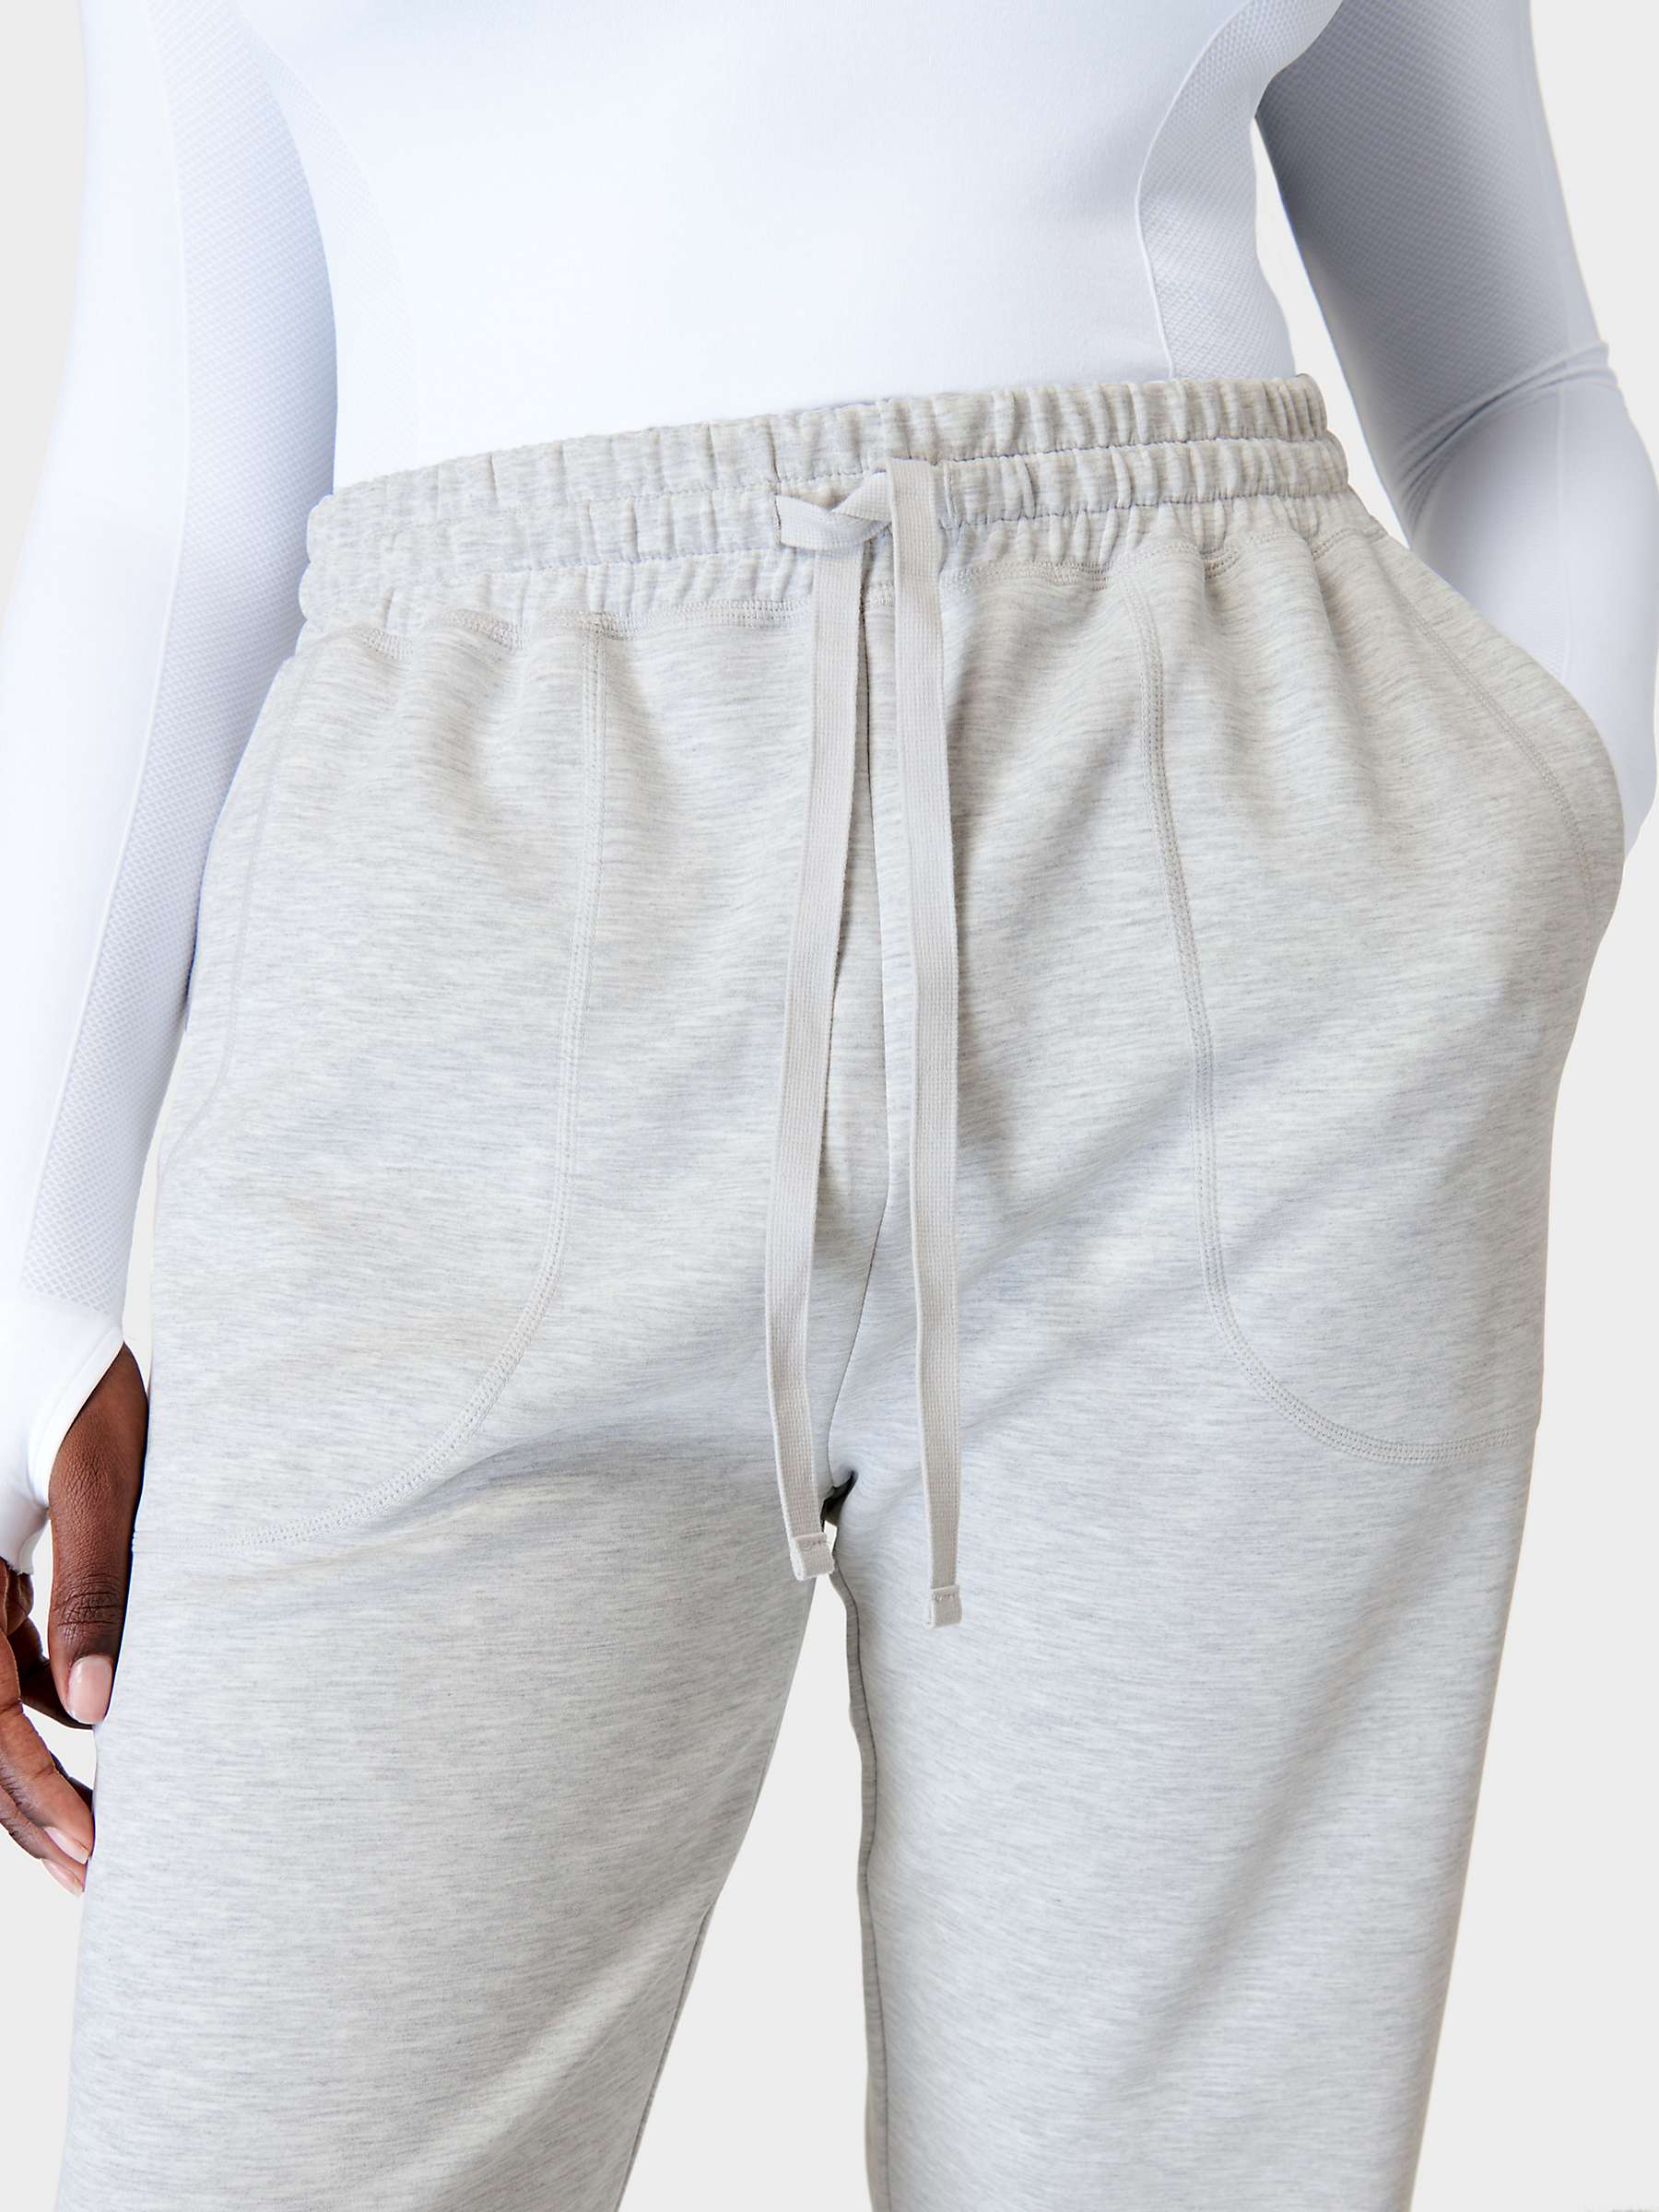 Buy Sweaty Betty Sand Wash Cuffed Joggers Online at johnlewis.com